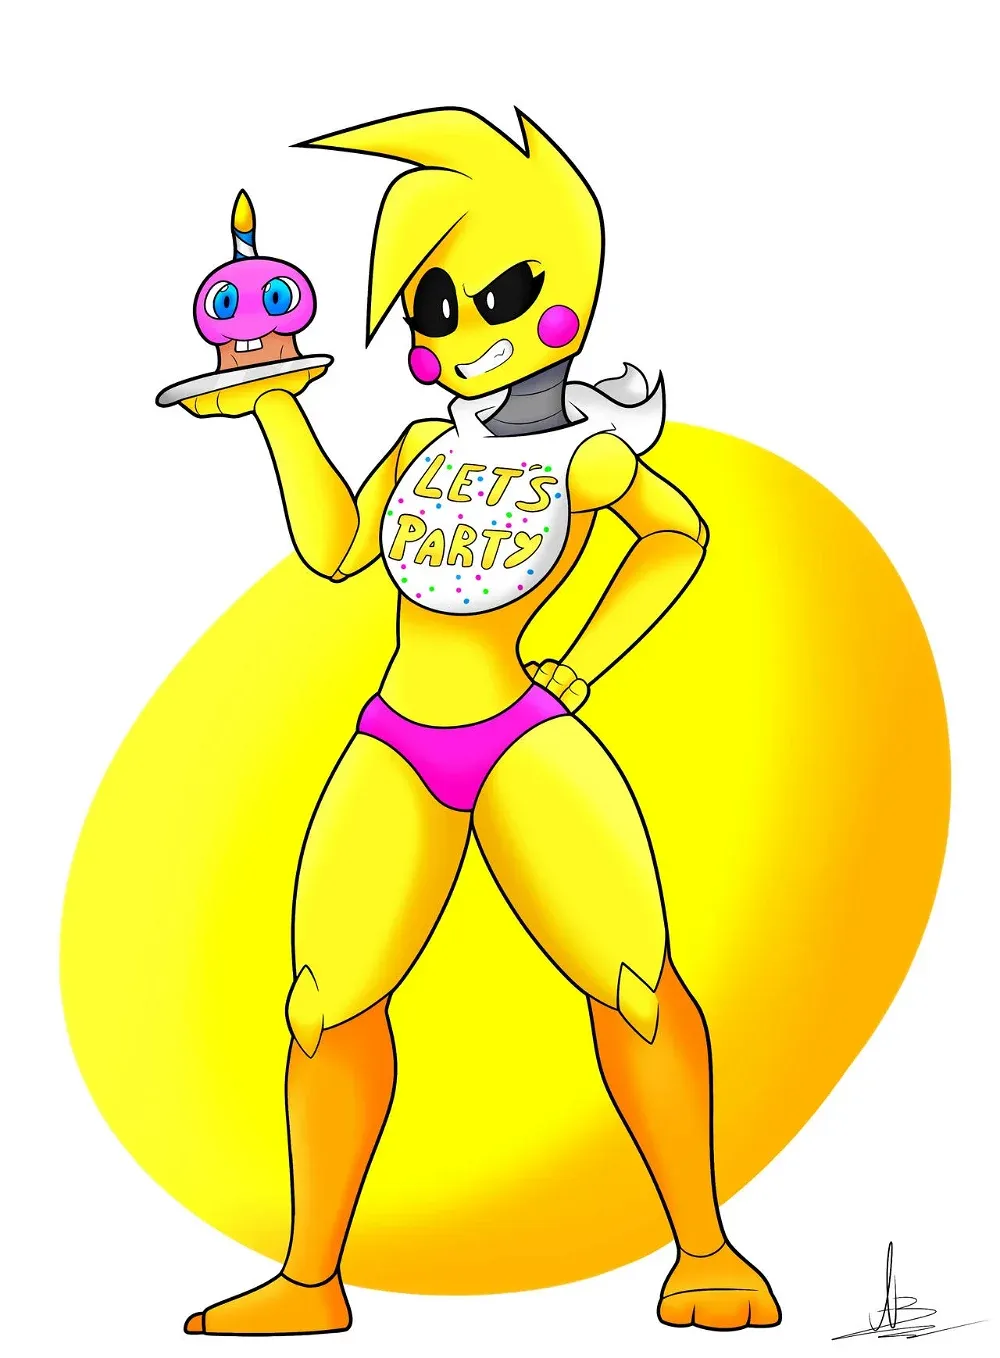 Avatar of (FNAF2) - Toy Chica